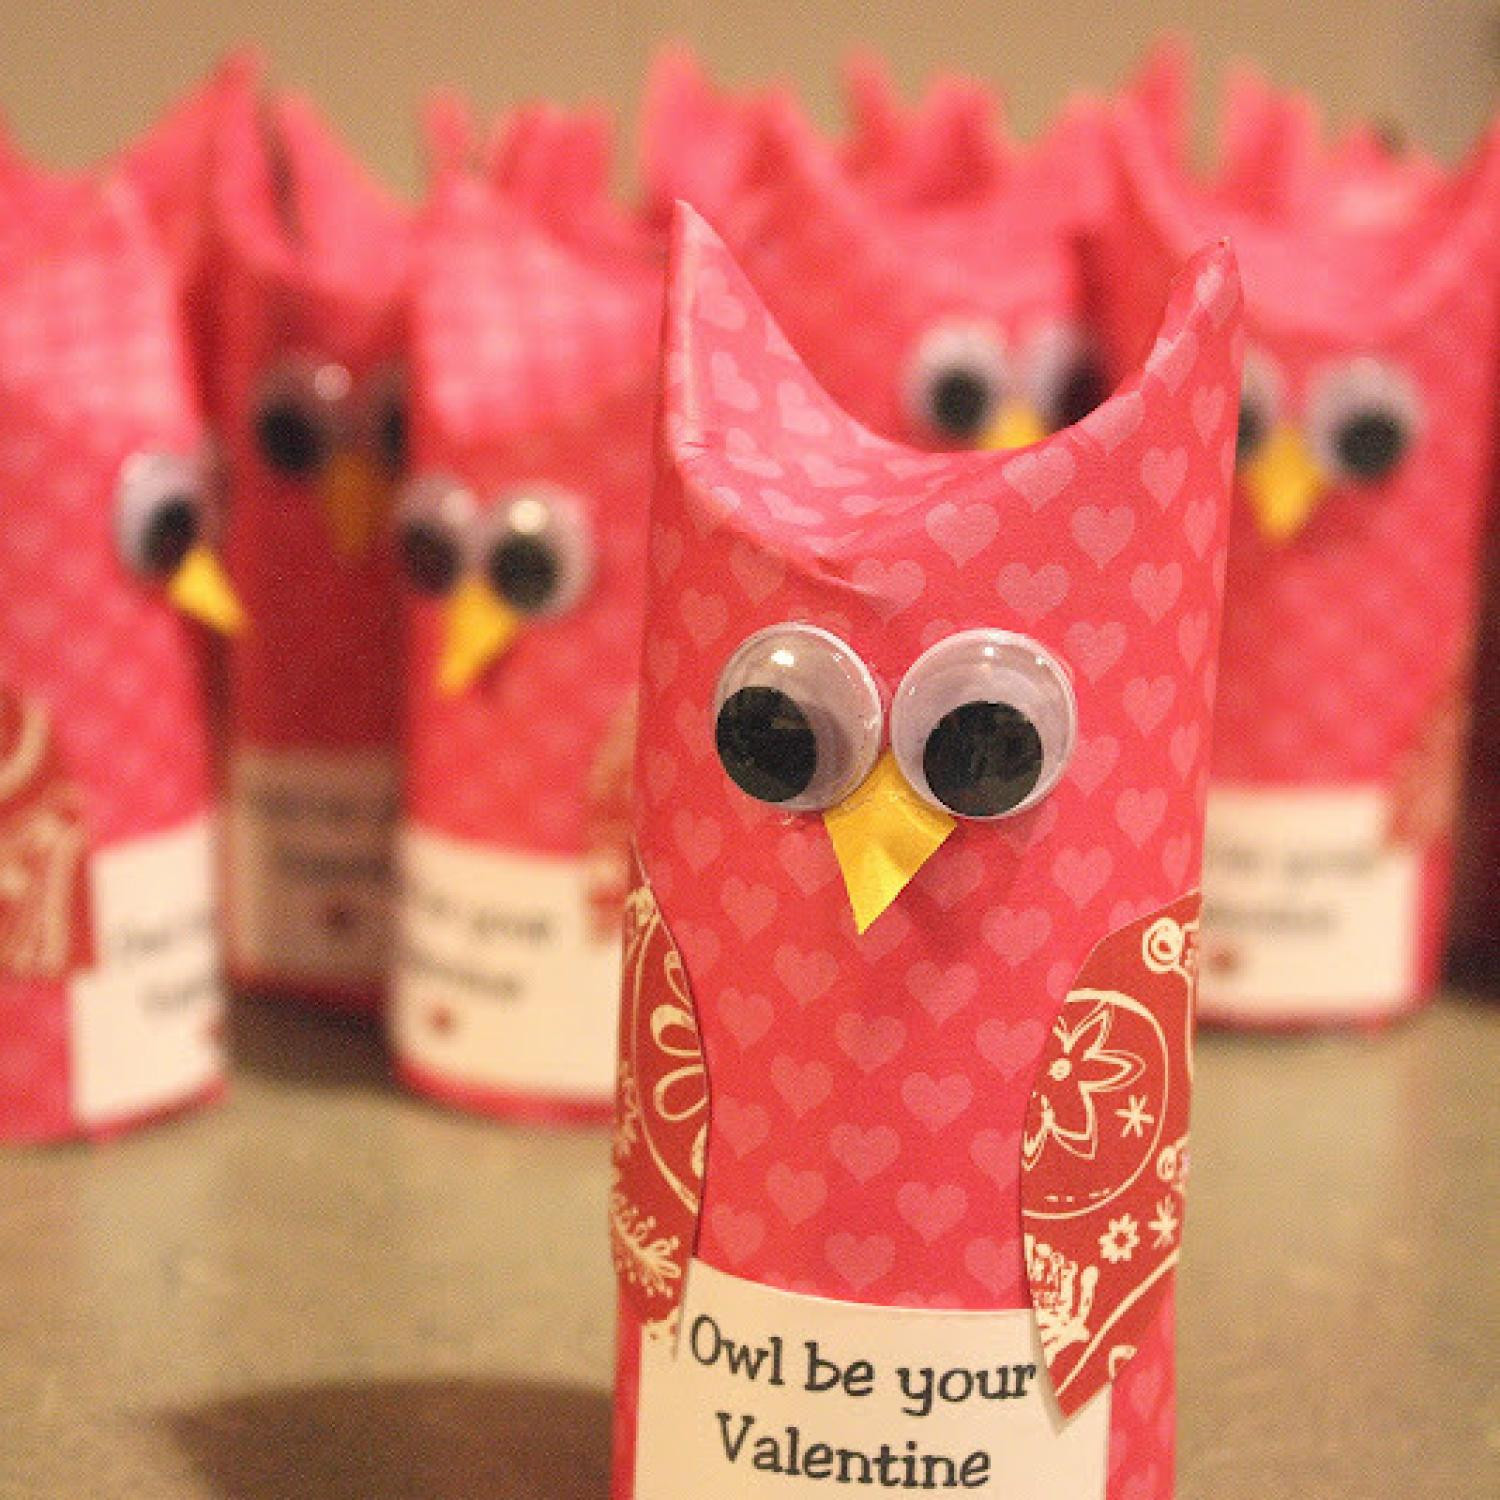 Easy To Make Valentine Gift Ideas
 Our Favorite Homemade Valentines for Kids